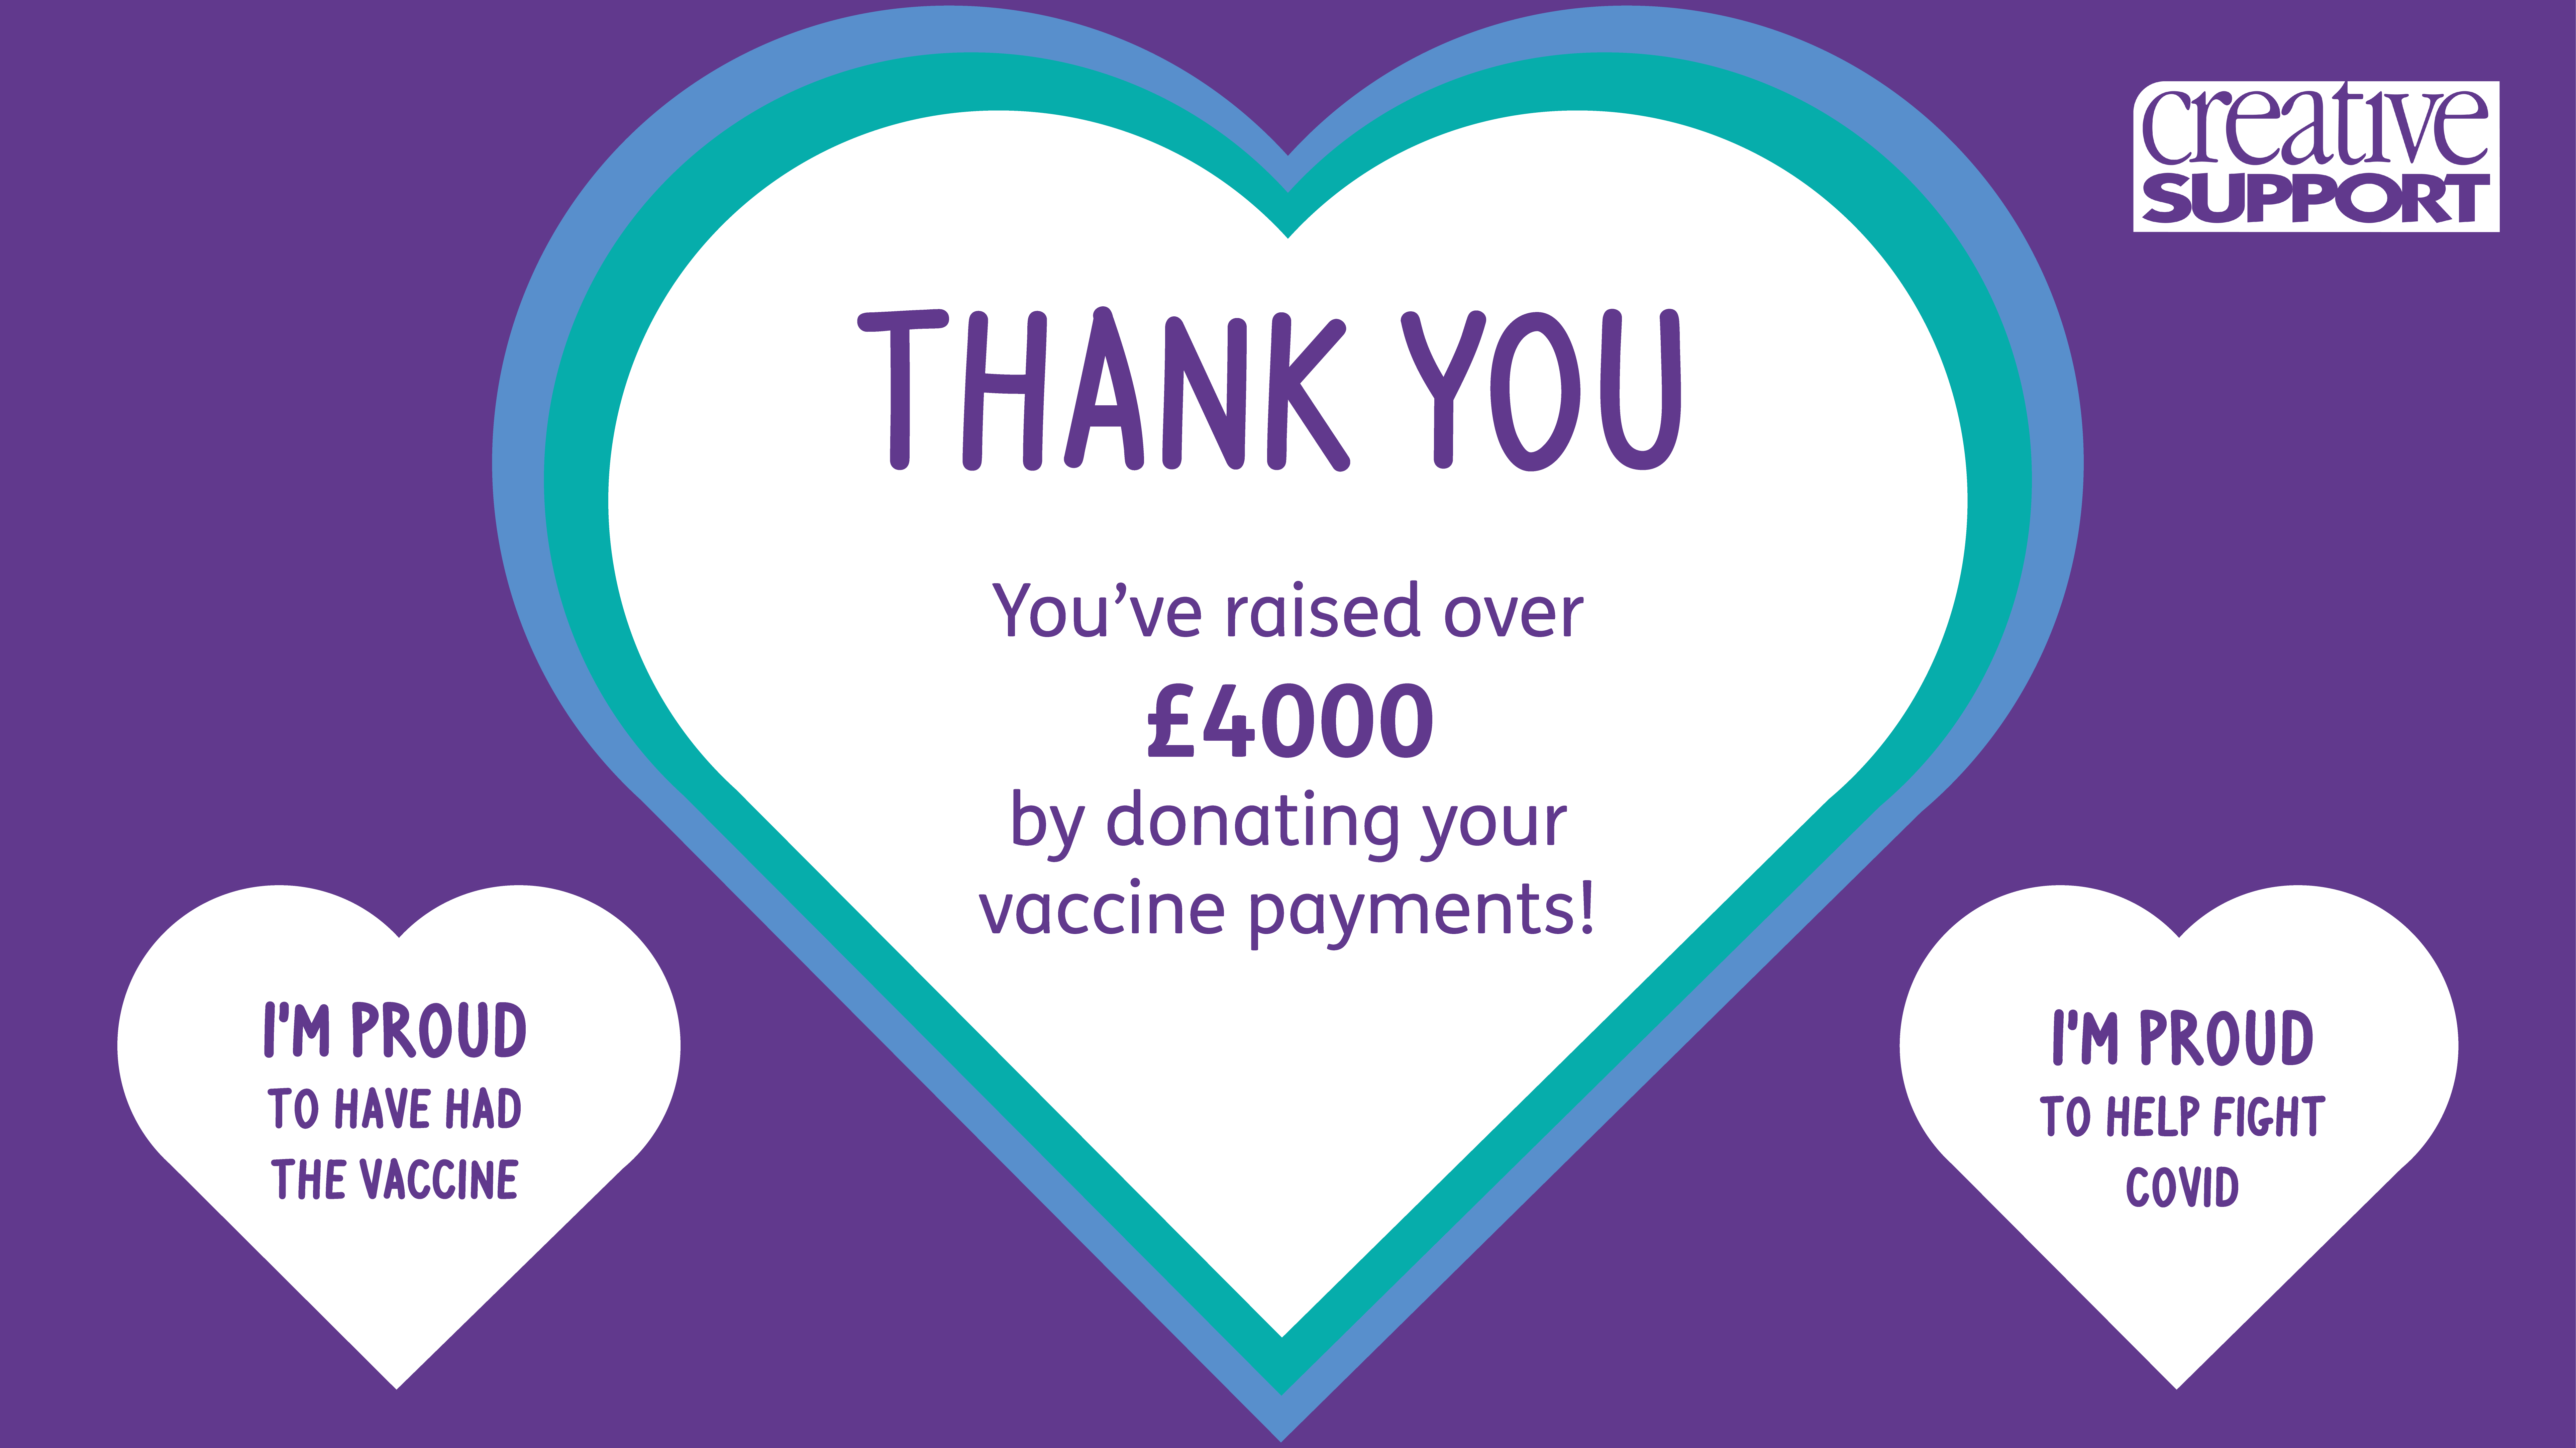 Thank you for your vaccine donations!